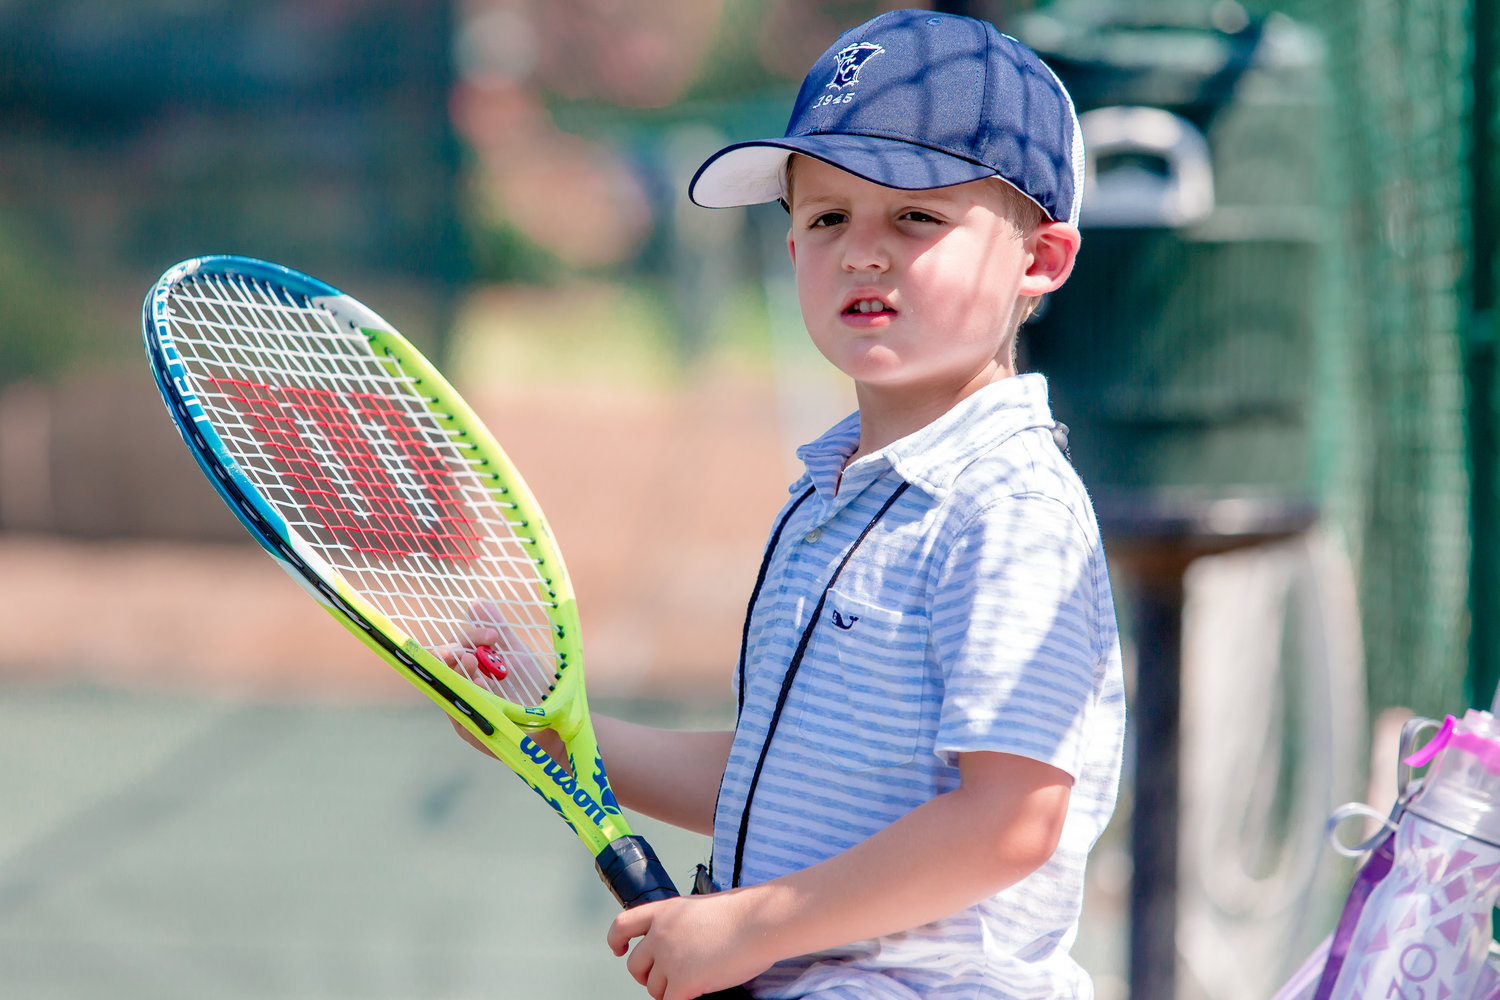 Several summer camps focus on athletics, such as tennis.